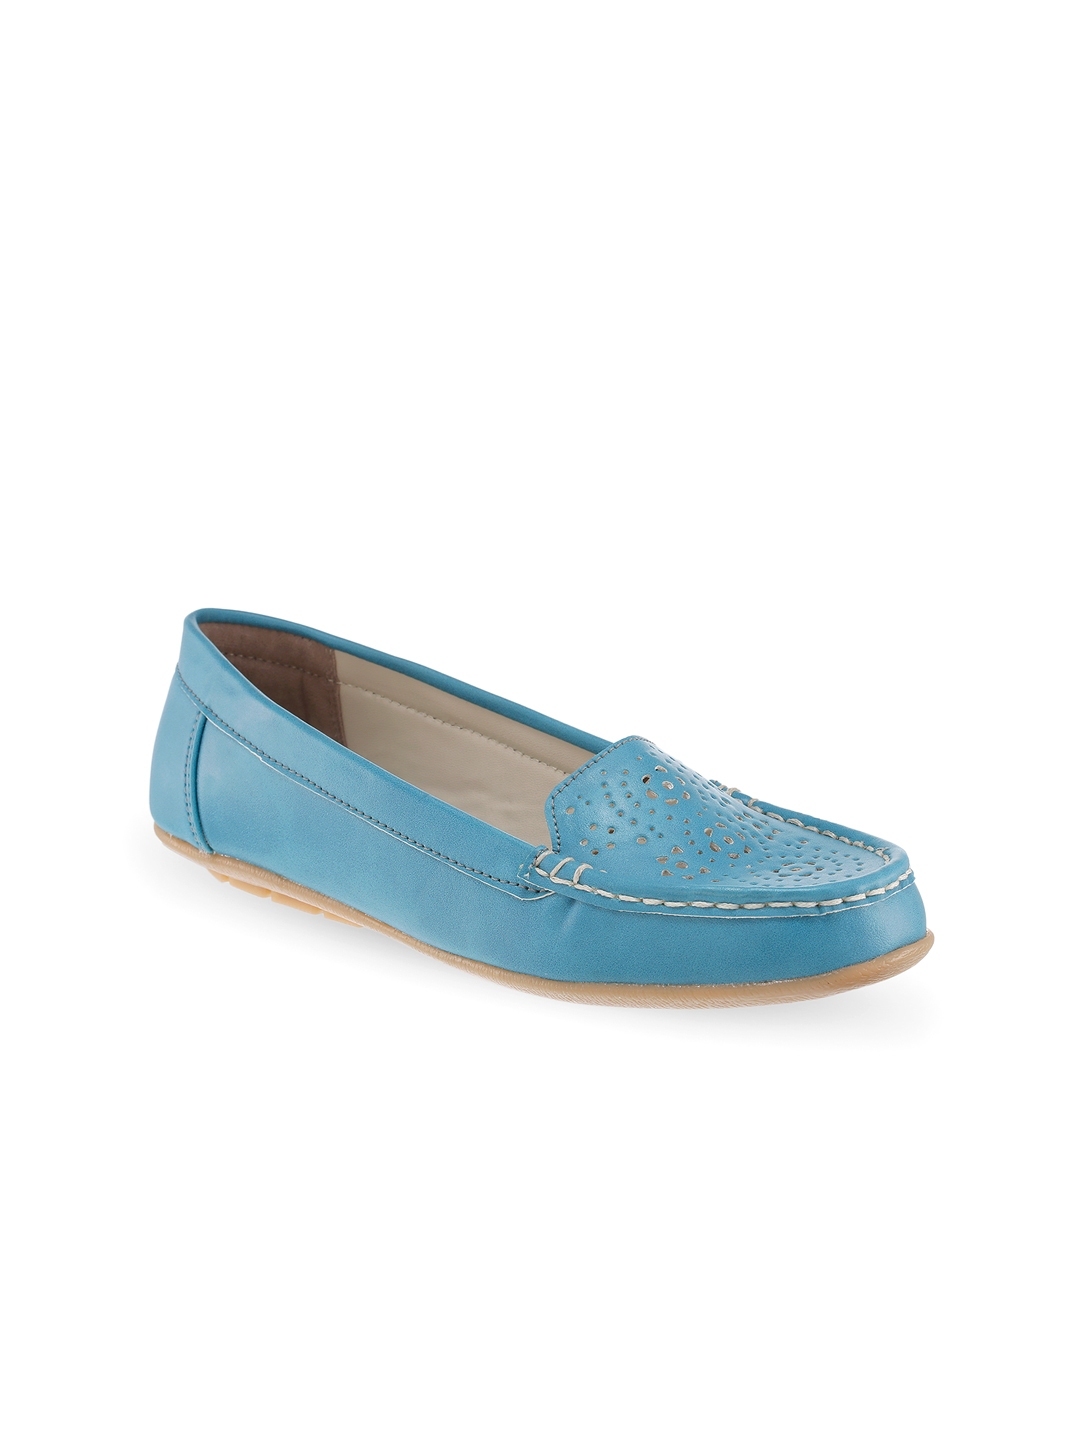 Buy Signature Sole Women Blue Loafers - Casual Shoes for Women 1331019 ...